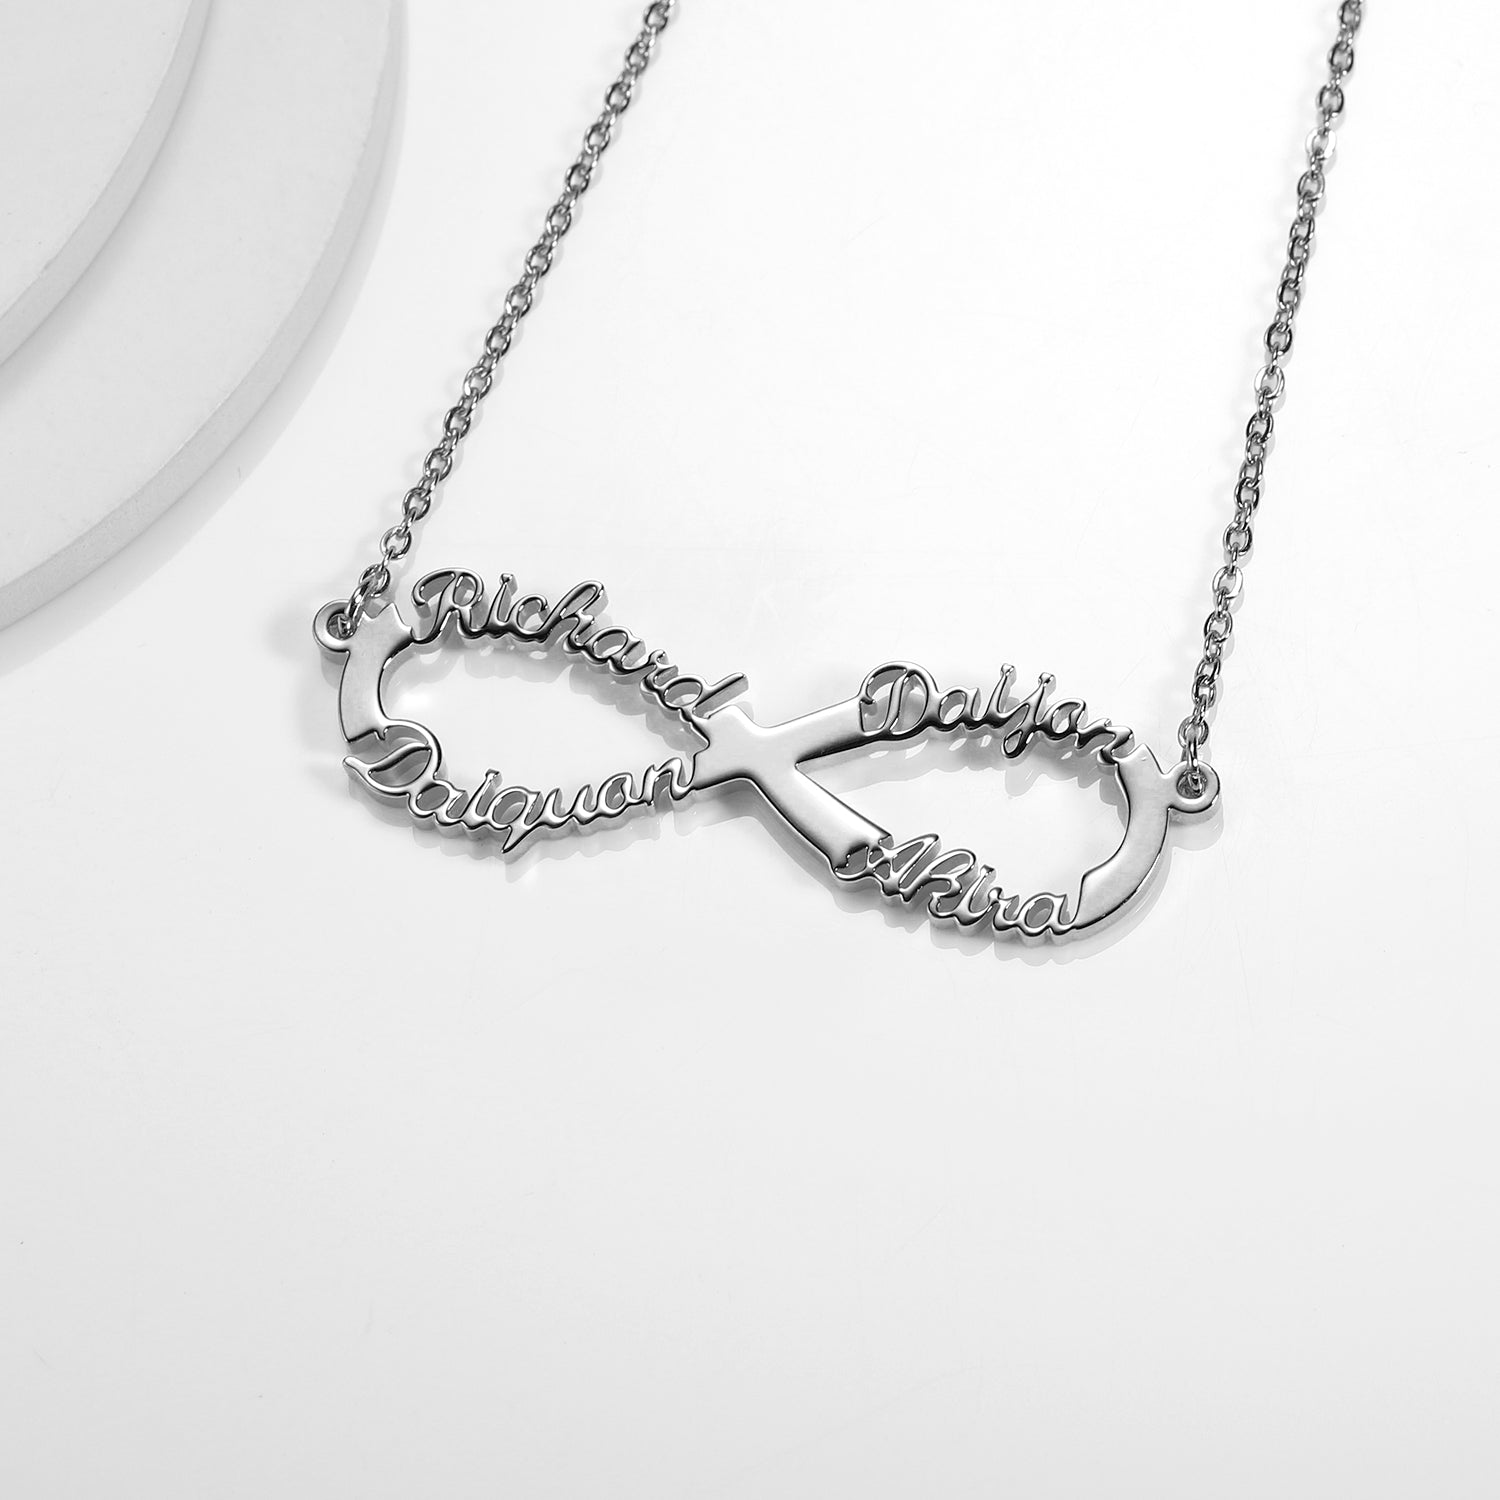 Personalized Infinity Necklace - Limitless Jewellery